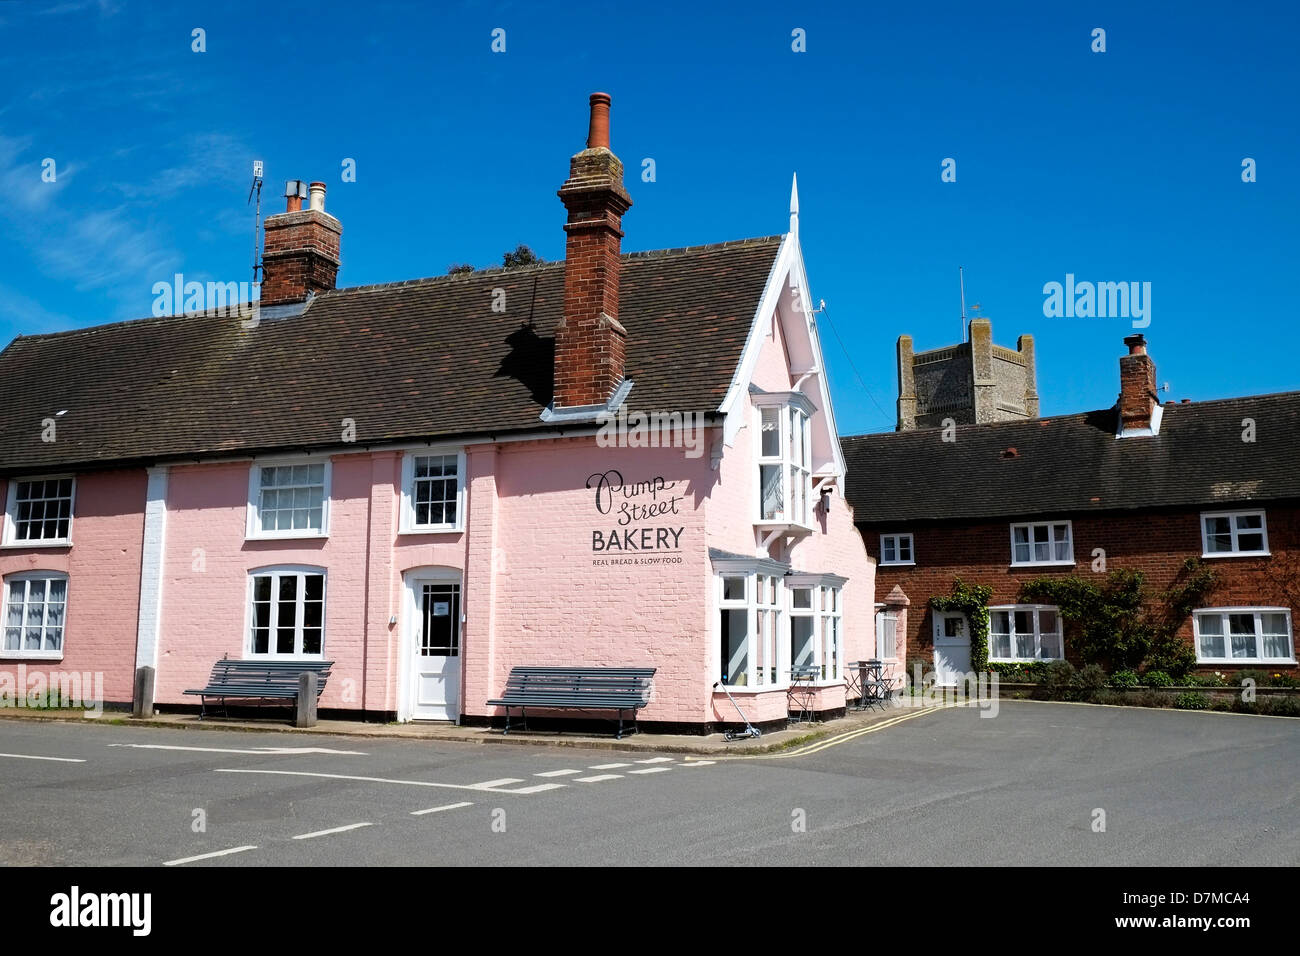 Pump Street Bakery in the town of Orford in Suffolk. Stock Photo